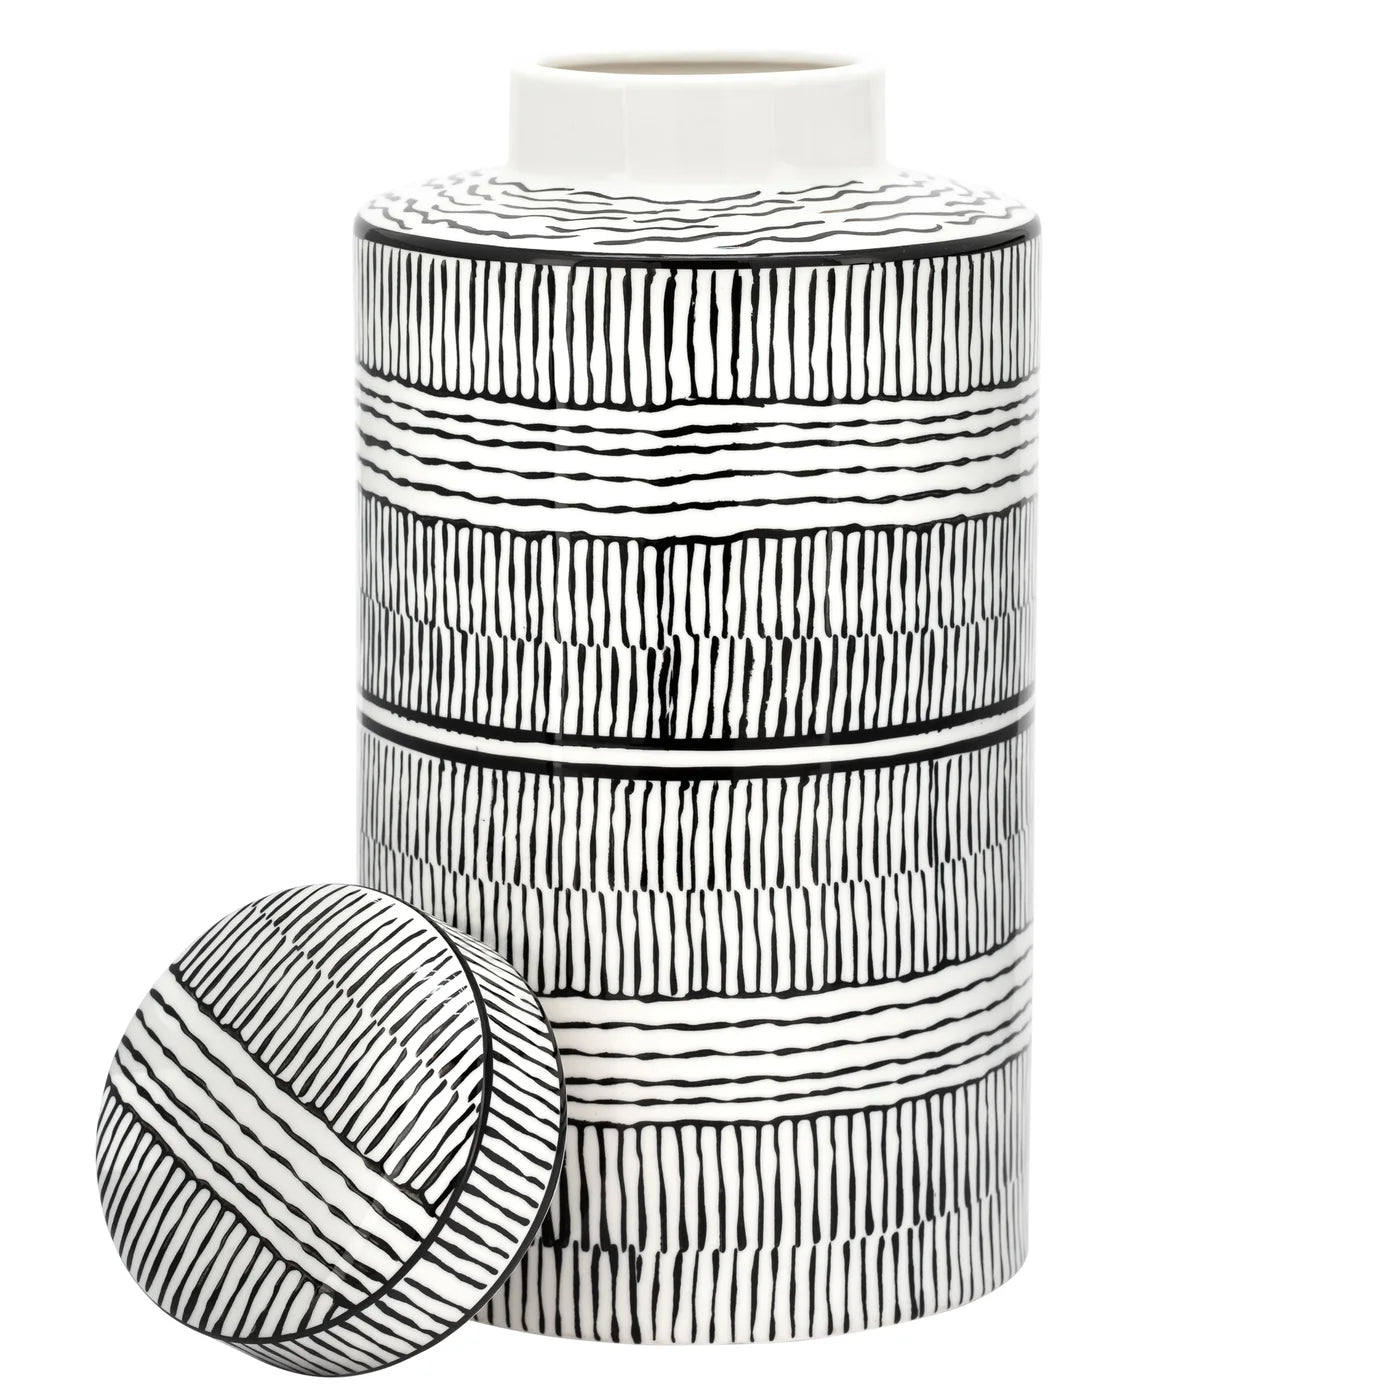 Takara Pattern Ceramic Canister with Lid - 11.5"